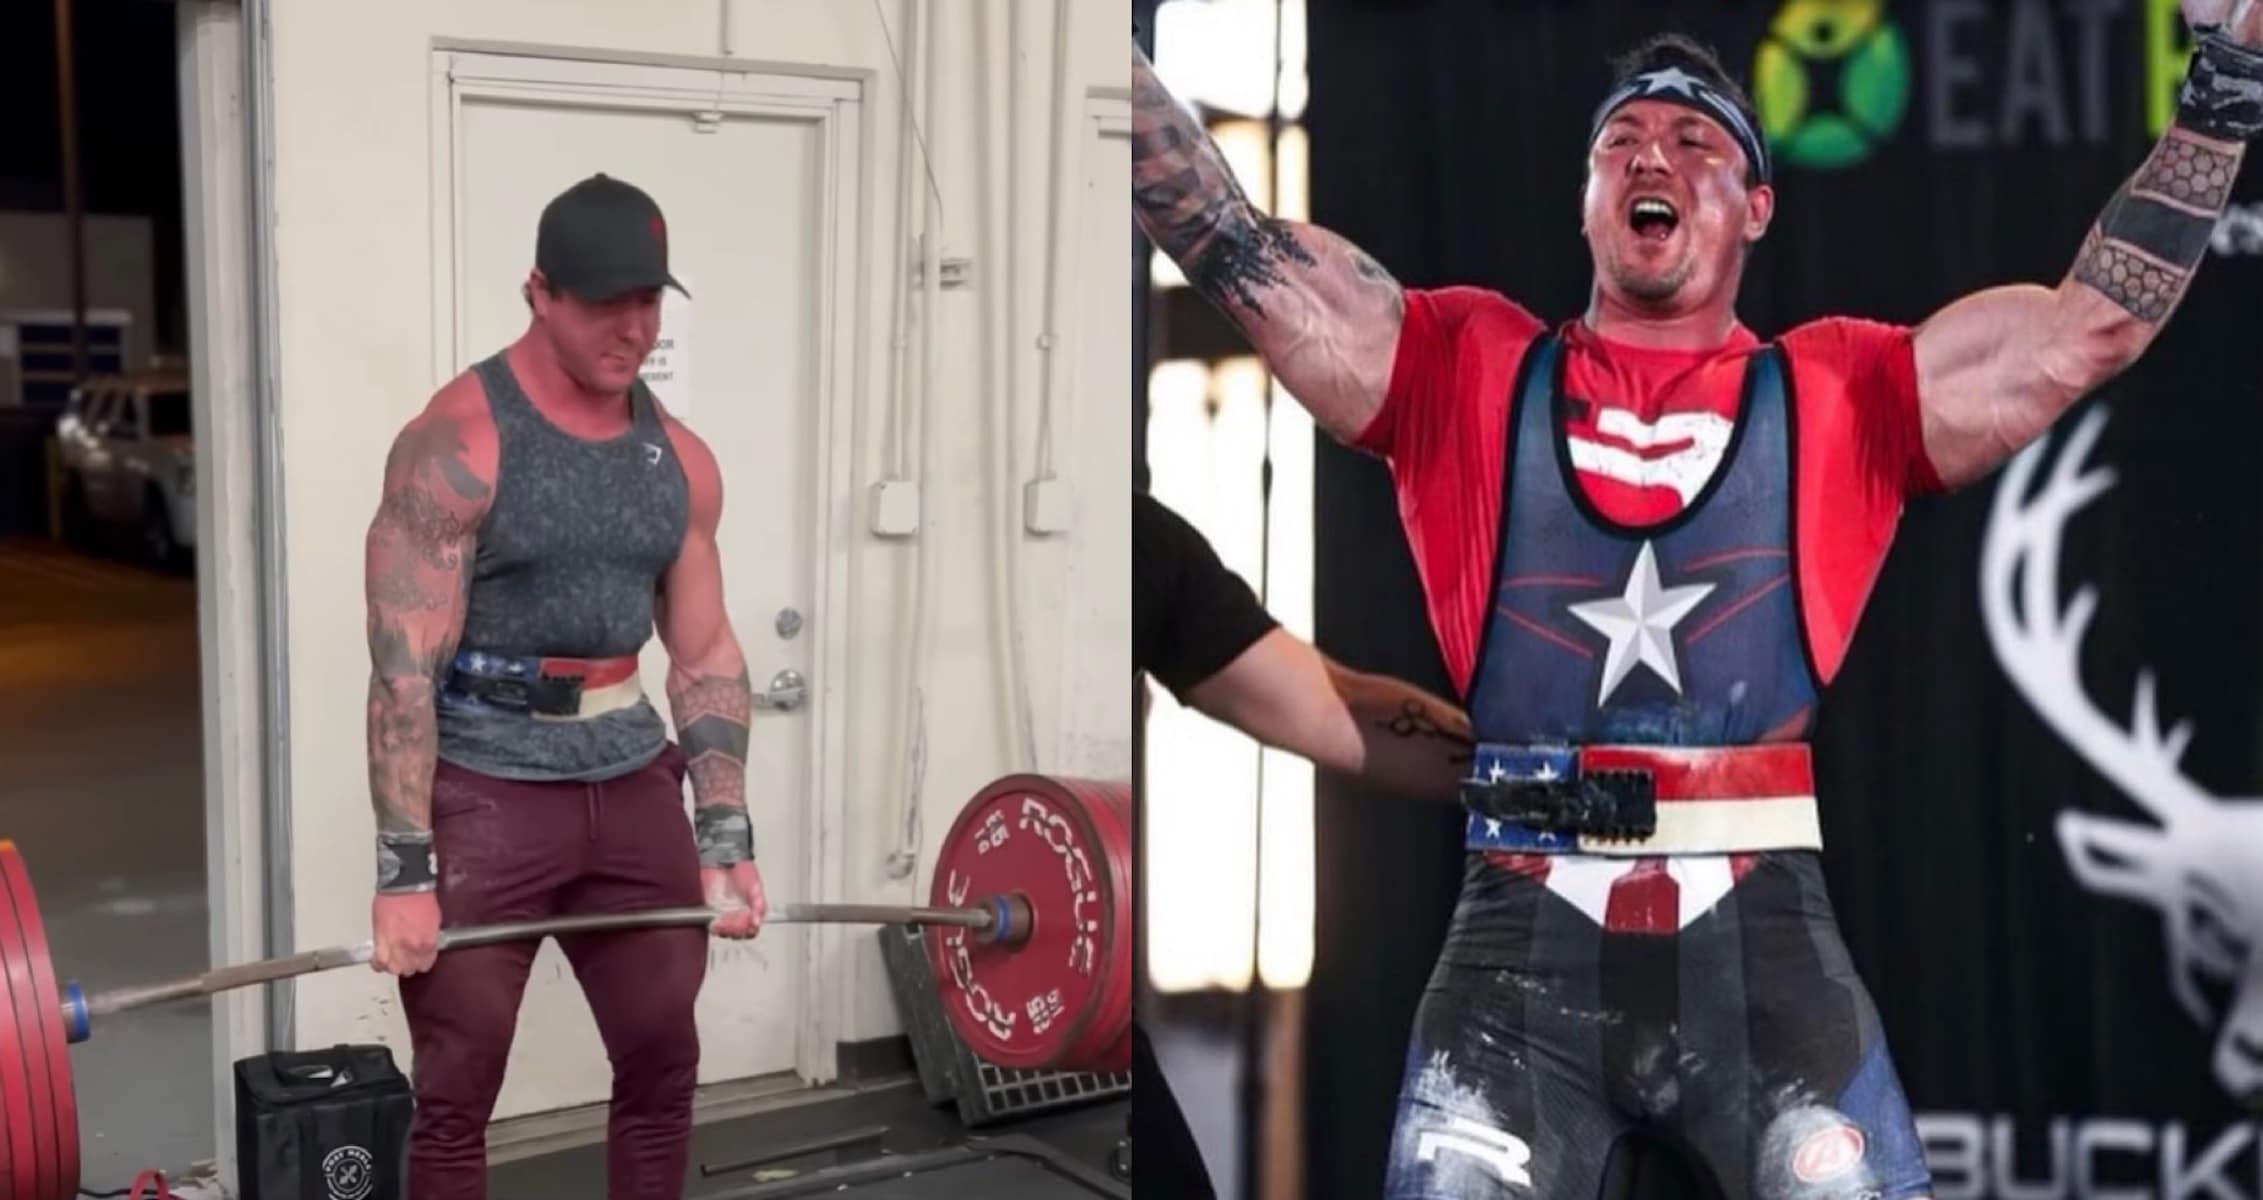 John Haack Approaches World Record With Easy 400kg Deadlift